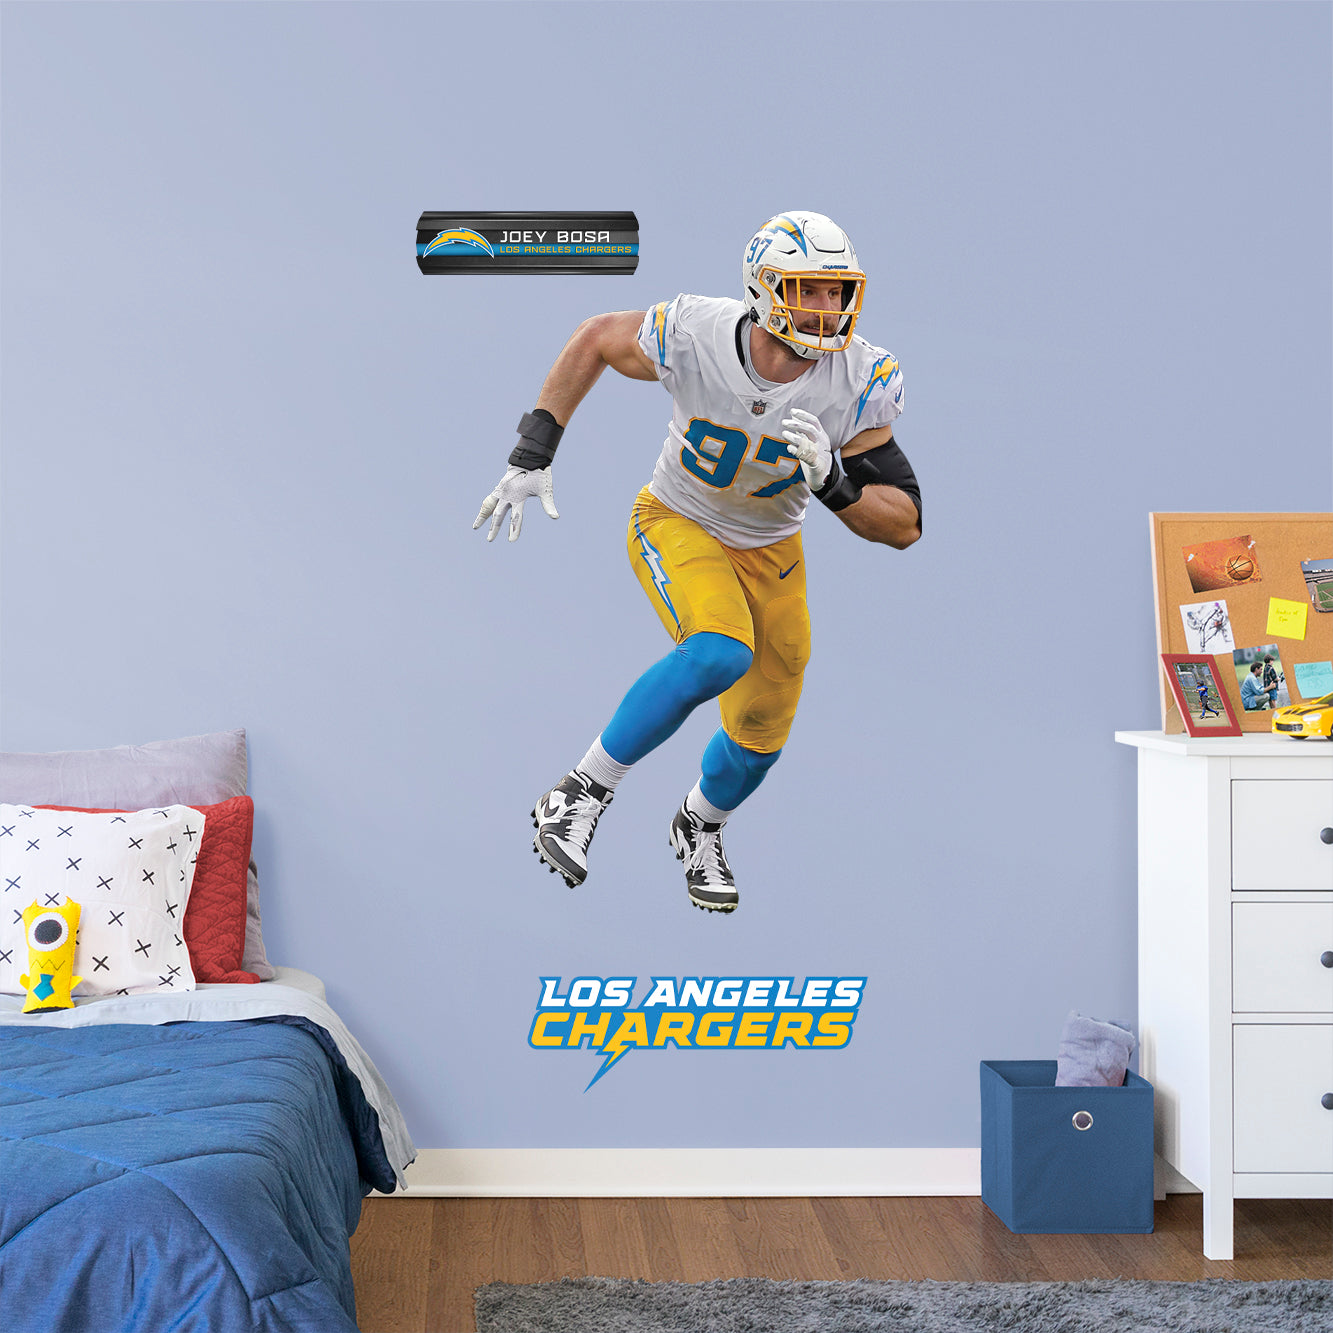 Joey Bosa 2020 - Officially Licensed NFL Removable Wall Decal Giant Athlete + 2 Decals (32"W x 50"H) by Fathead | Vinyl